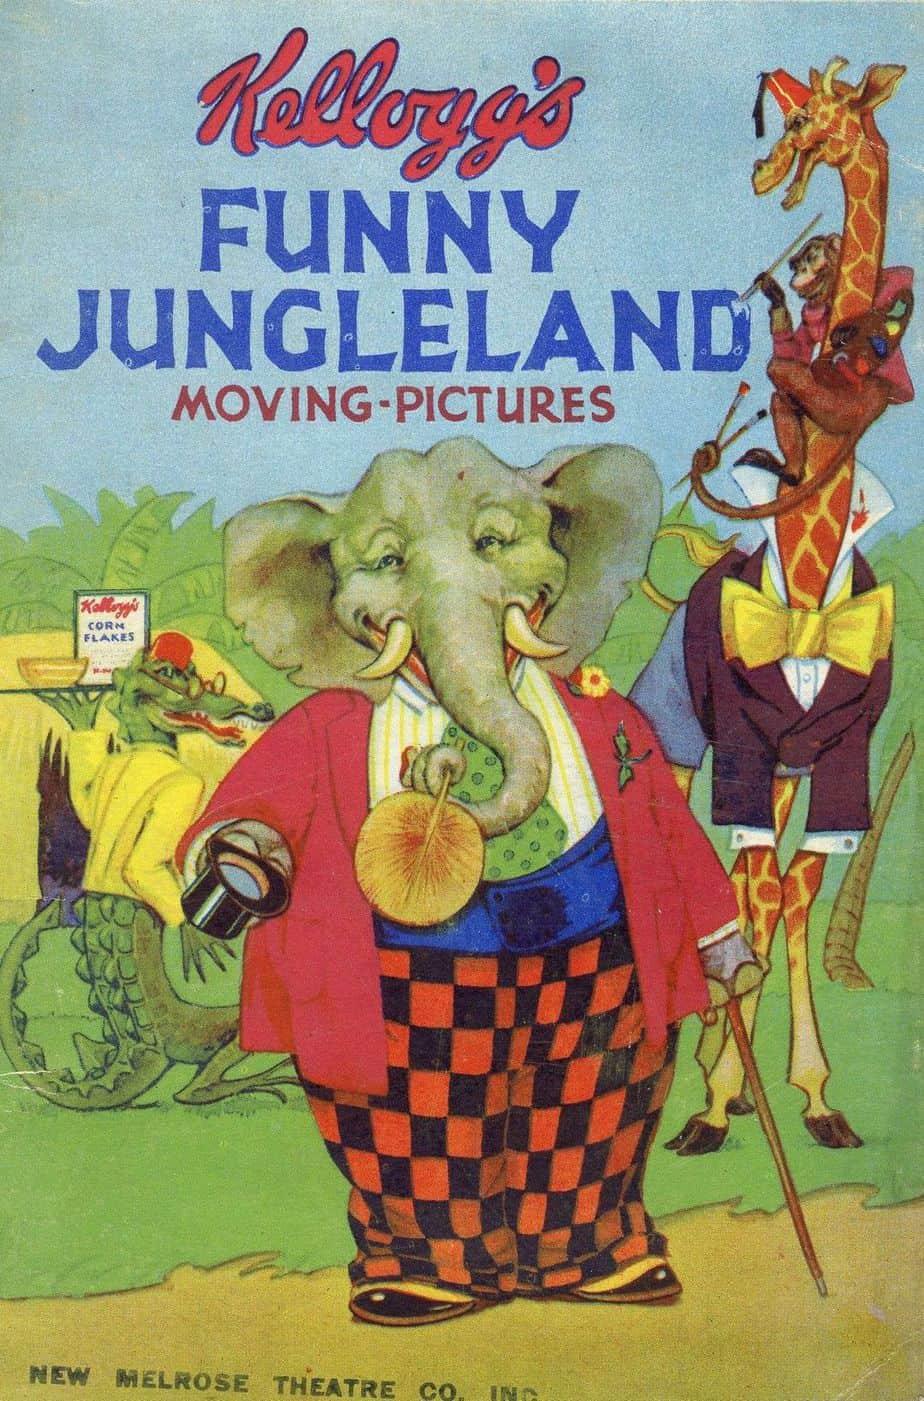 Transformation booklets were issued from the Kellogg Company given in the store when one bought a Kellogg cereal box elephant